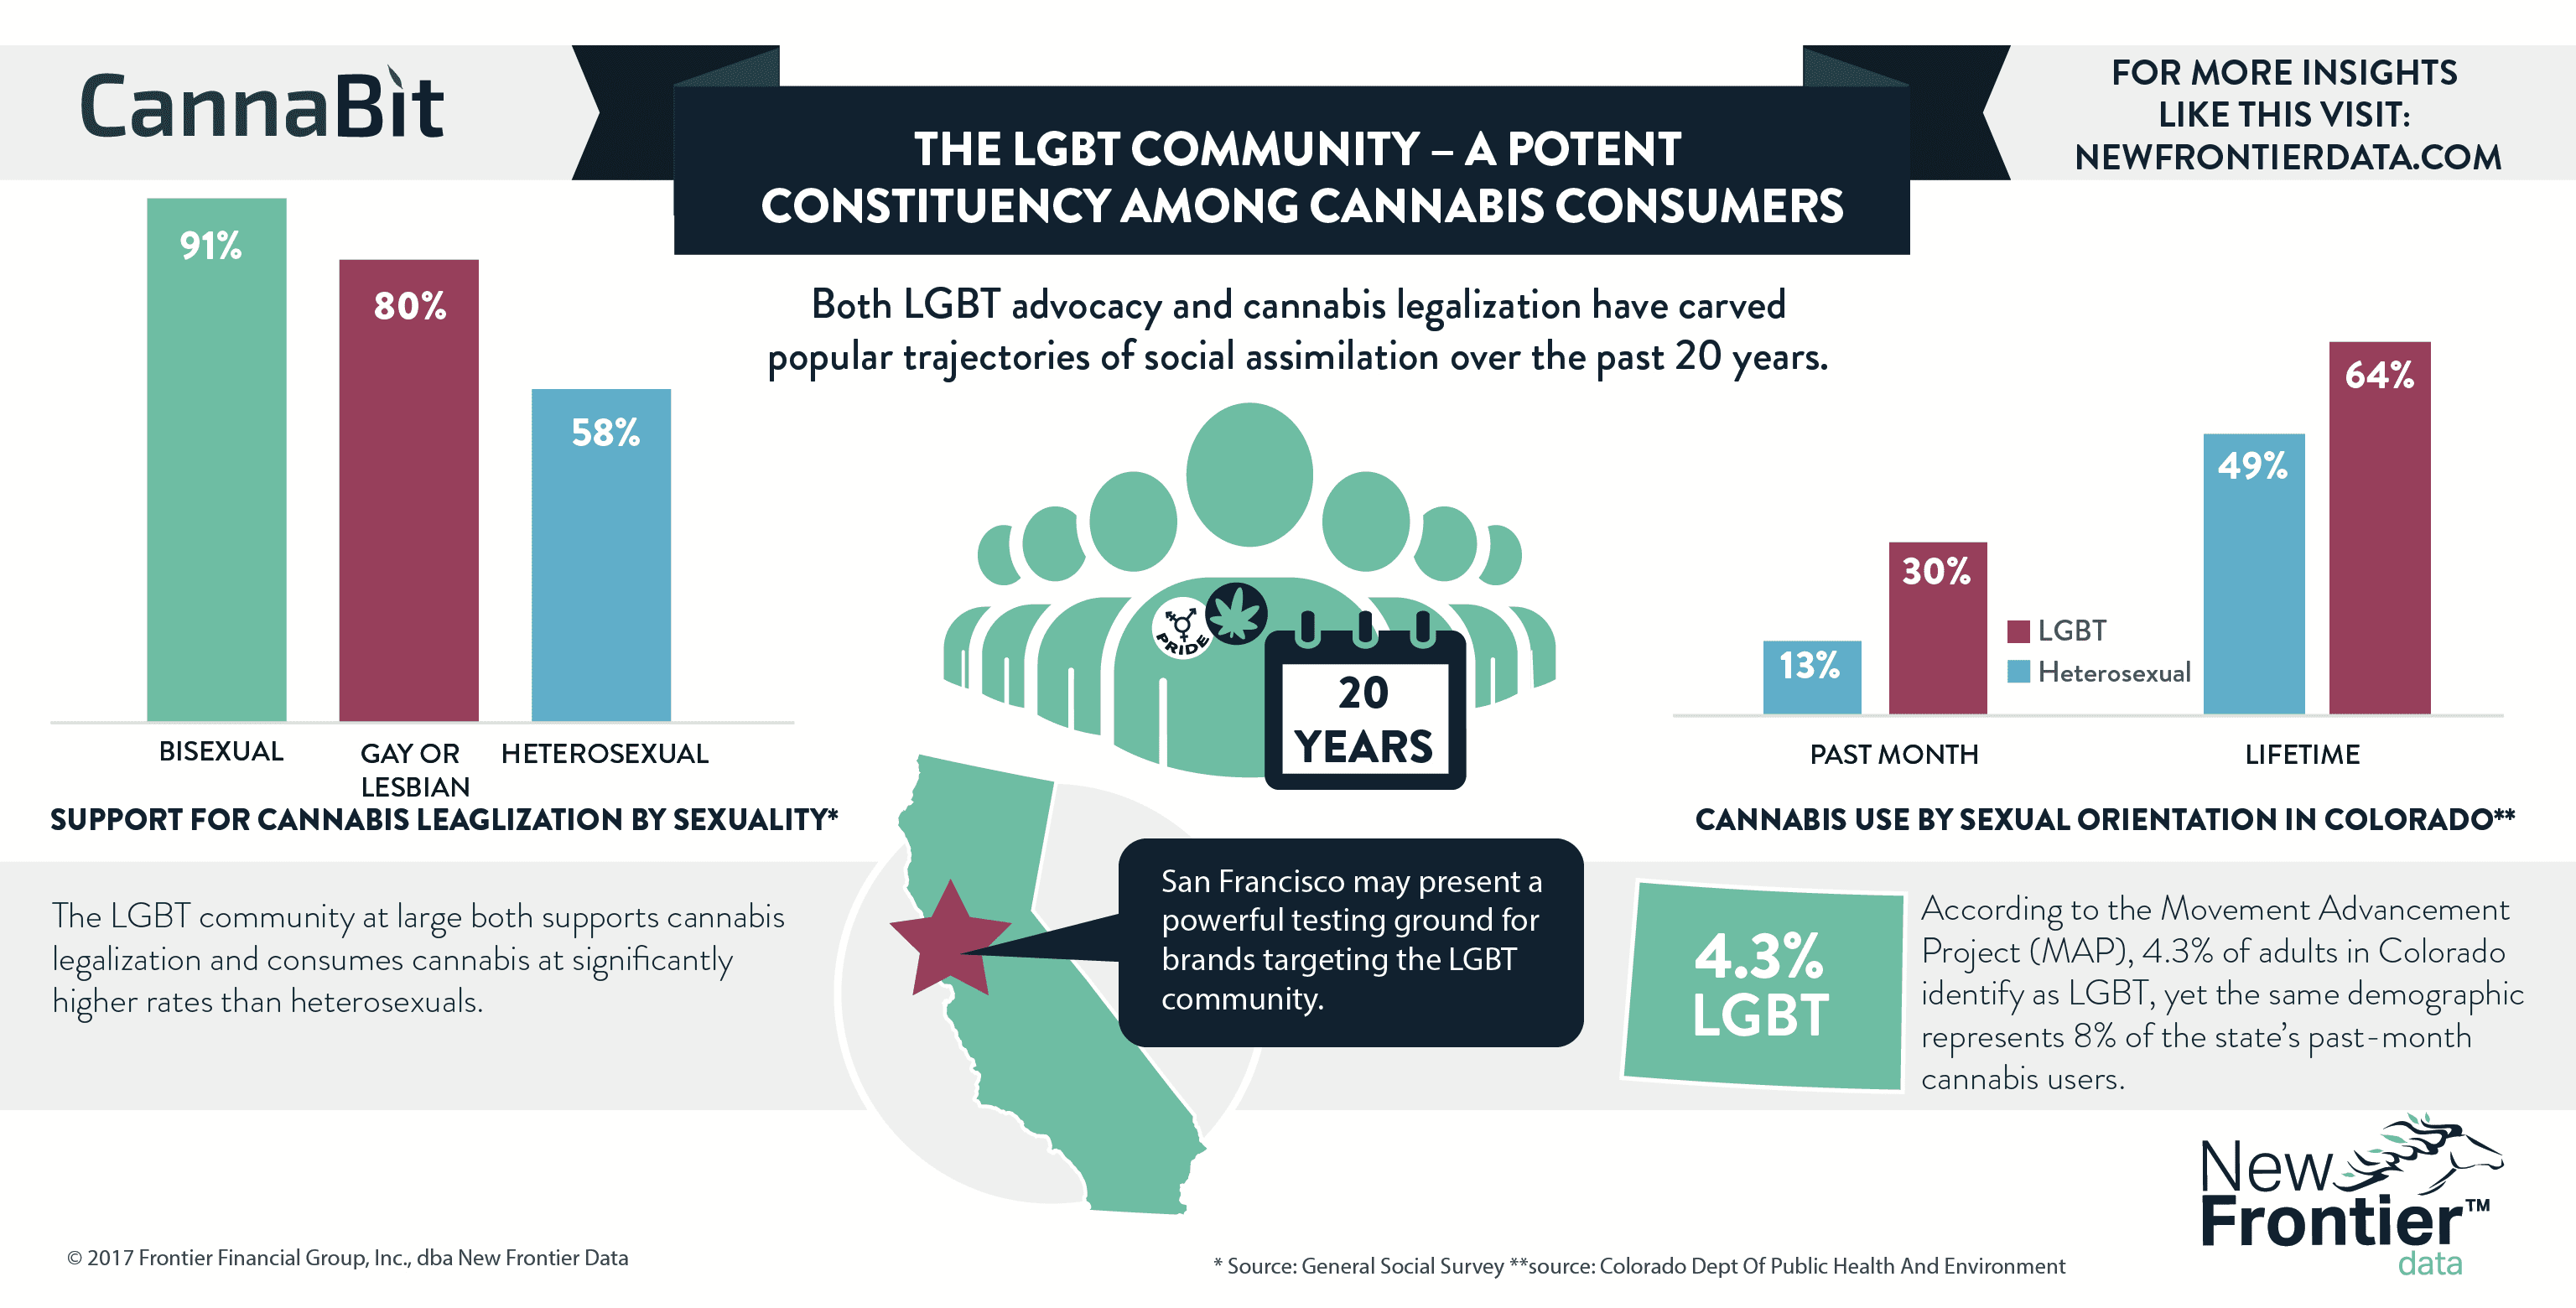 Cannabit: The LGBT Community - A Potent Constituency Among Cannabis Consumers / 07022017